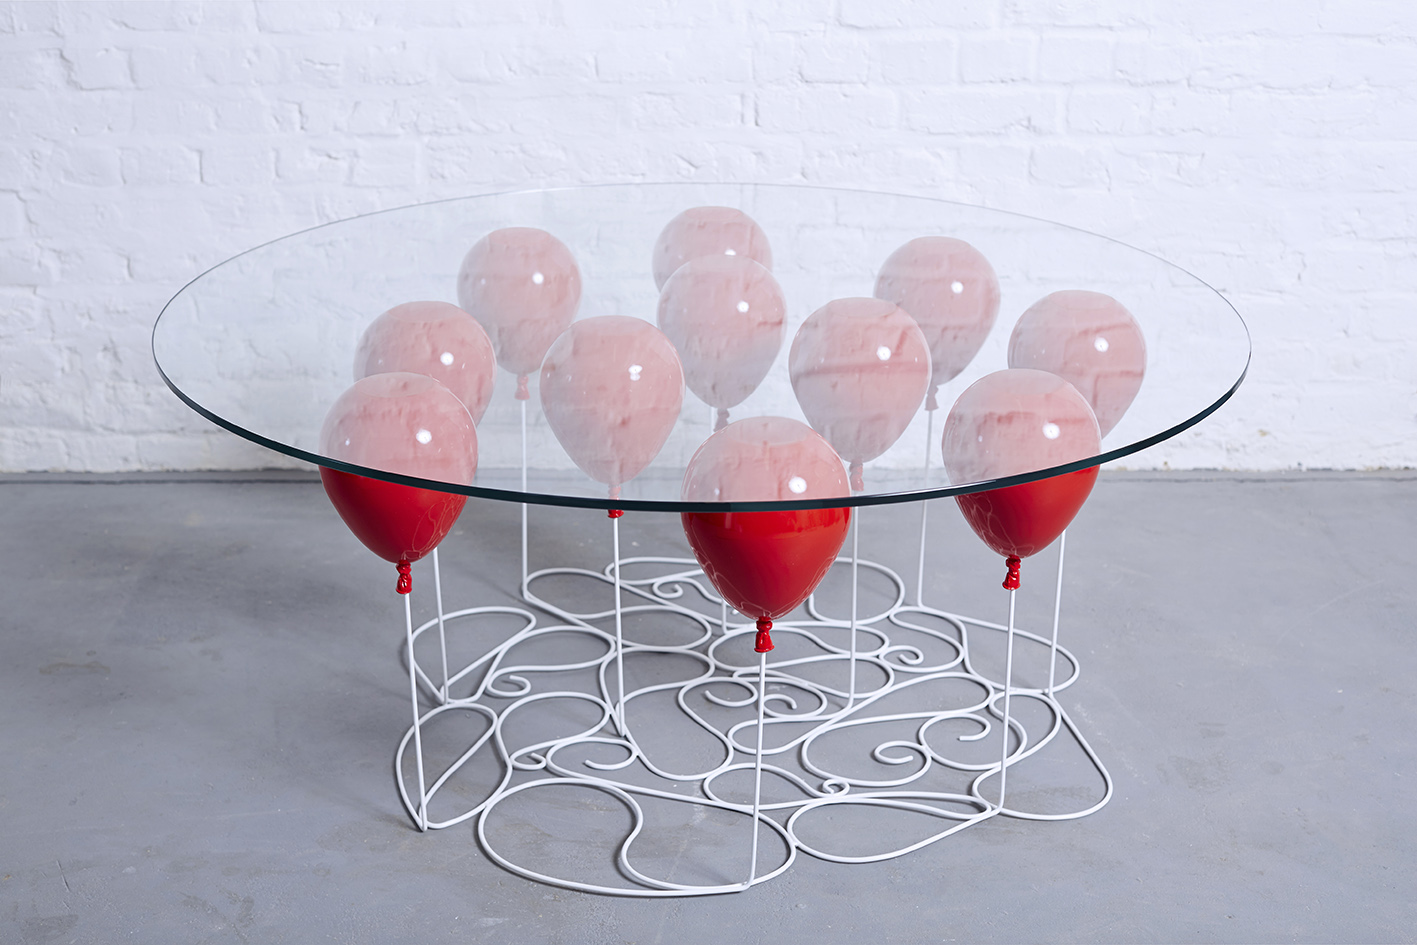 A Coffee Table Made Out Of Glass Based On 11 Helium Balloons Art